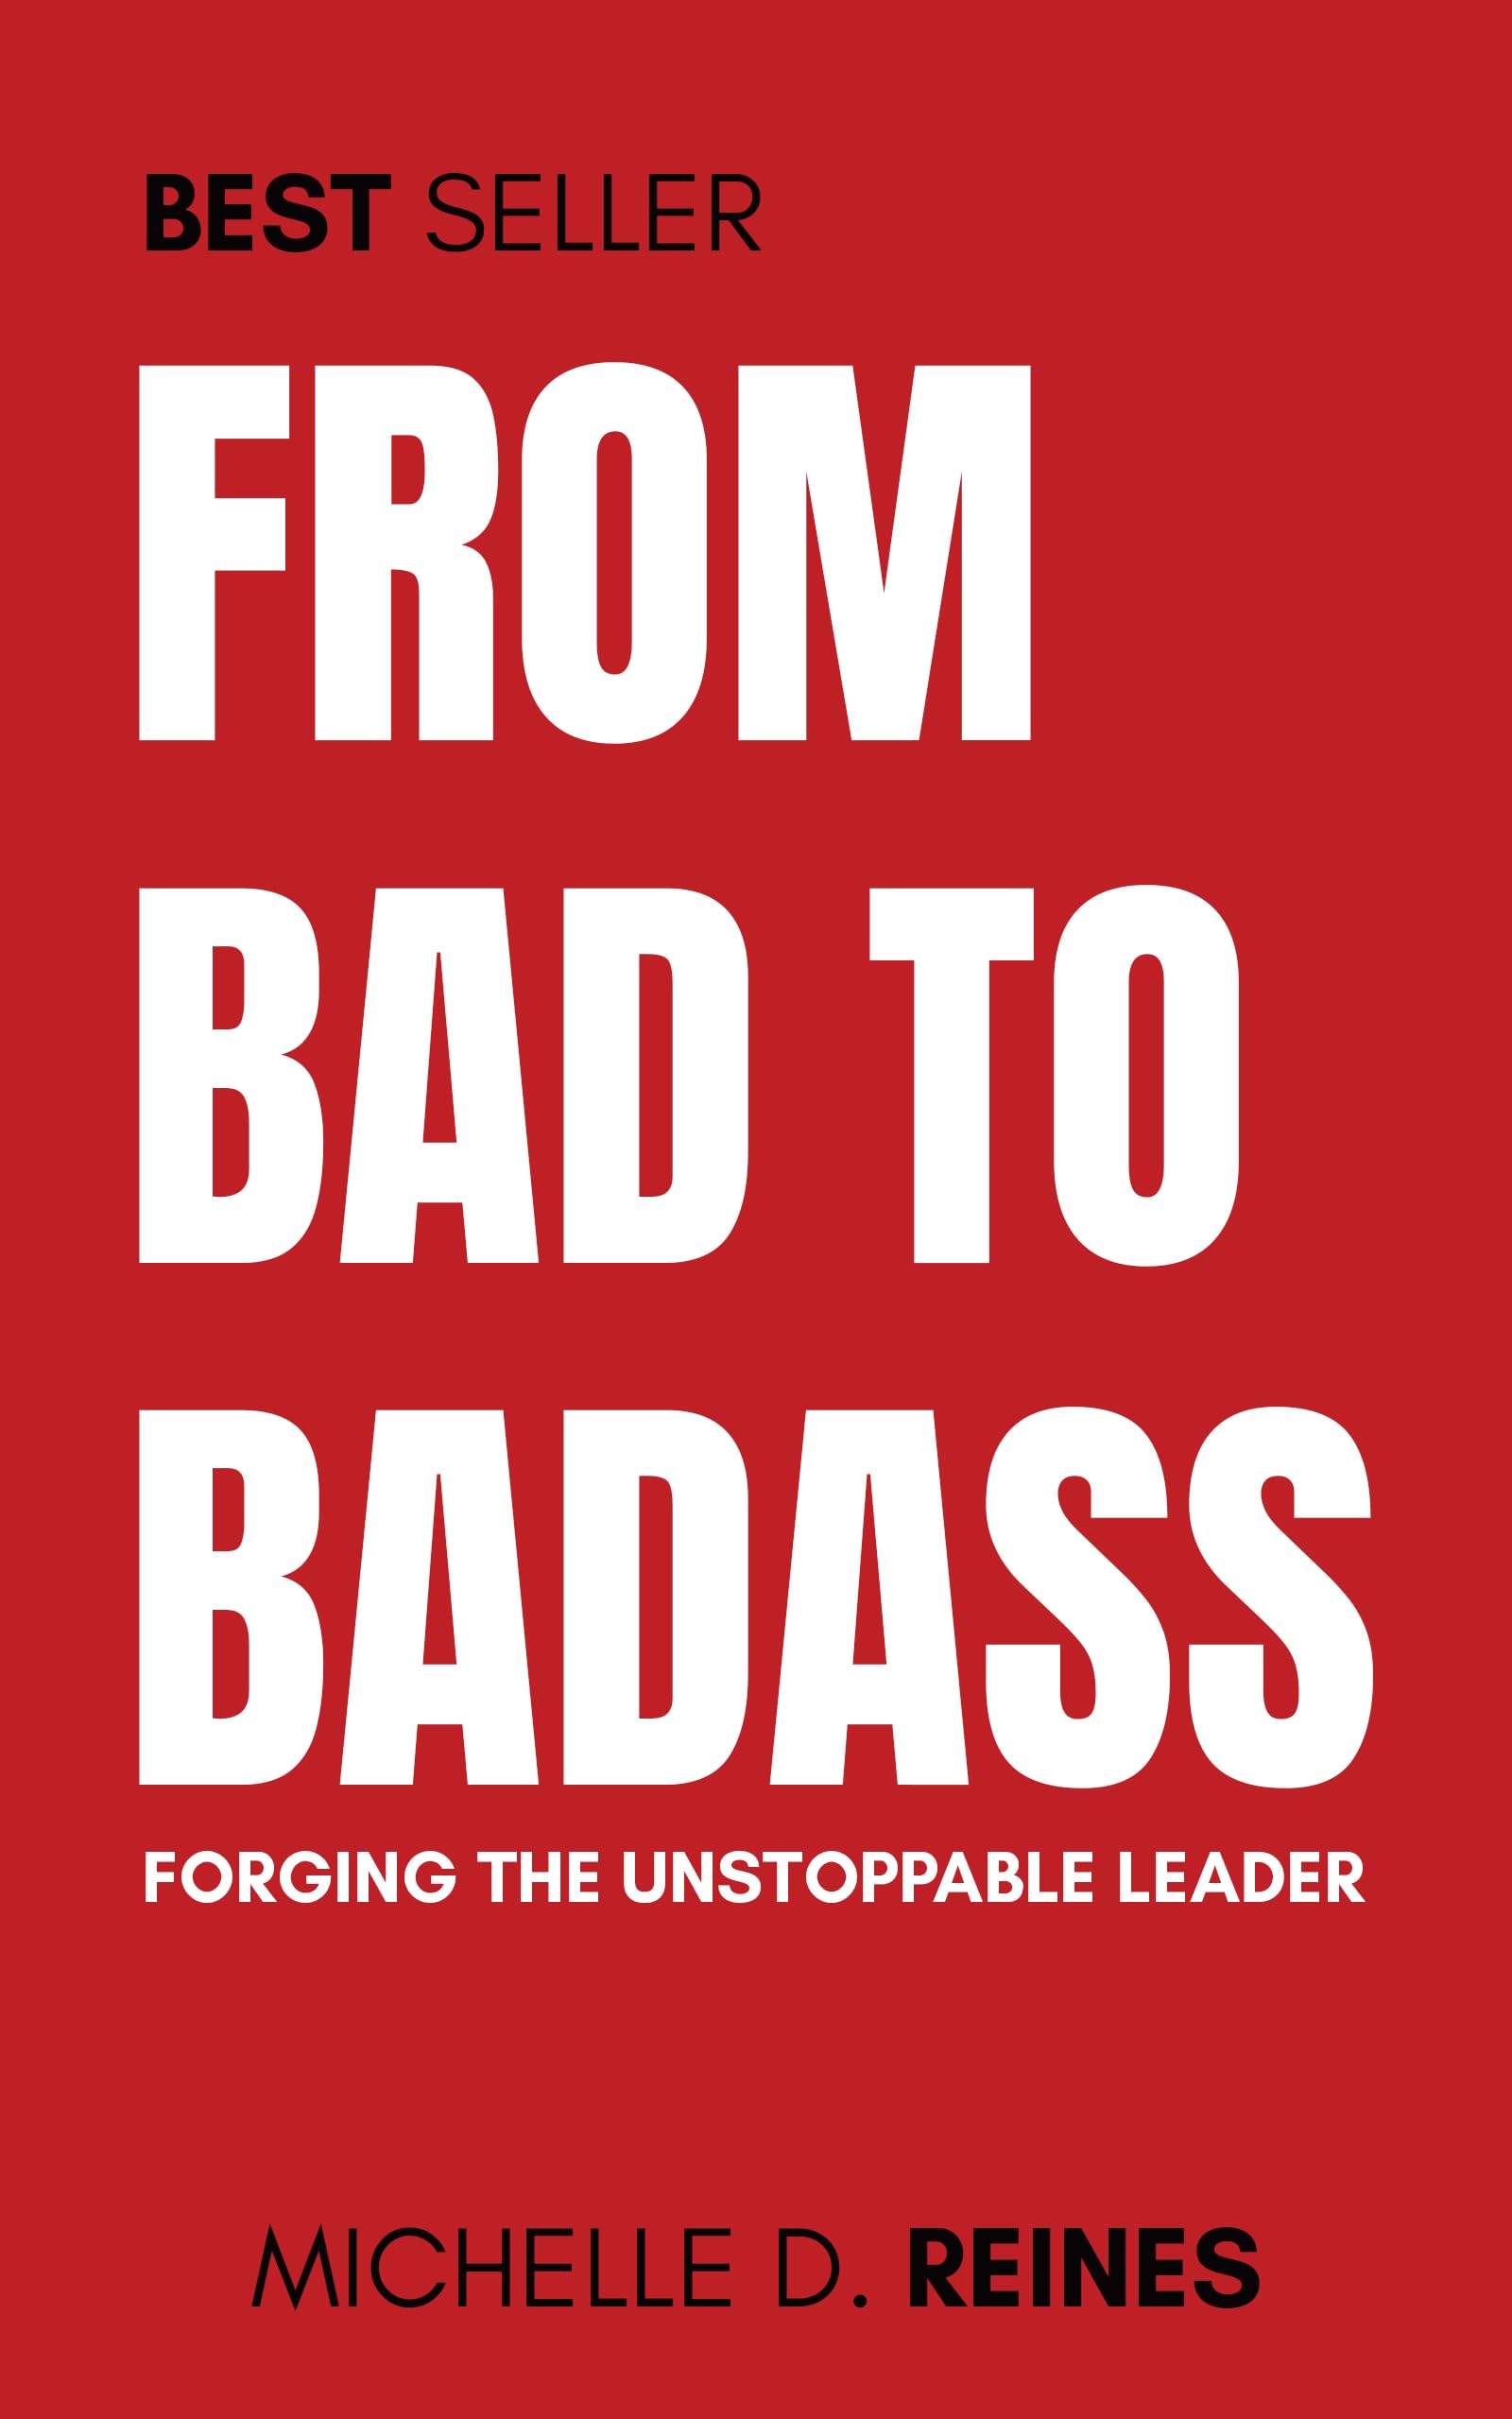 From Bad to Badass: Forging The Unstoppable Leader